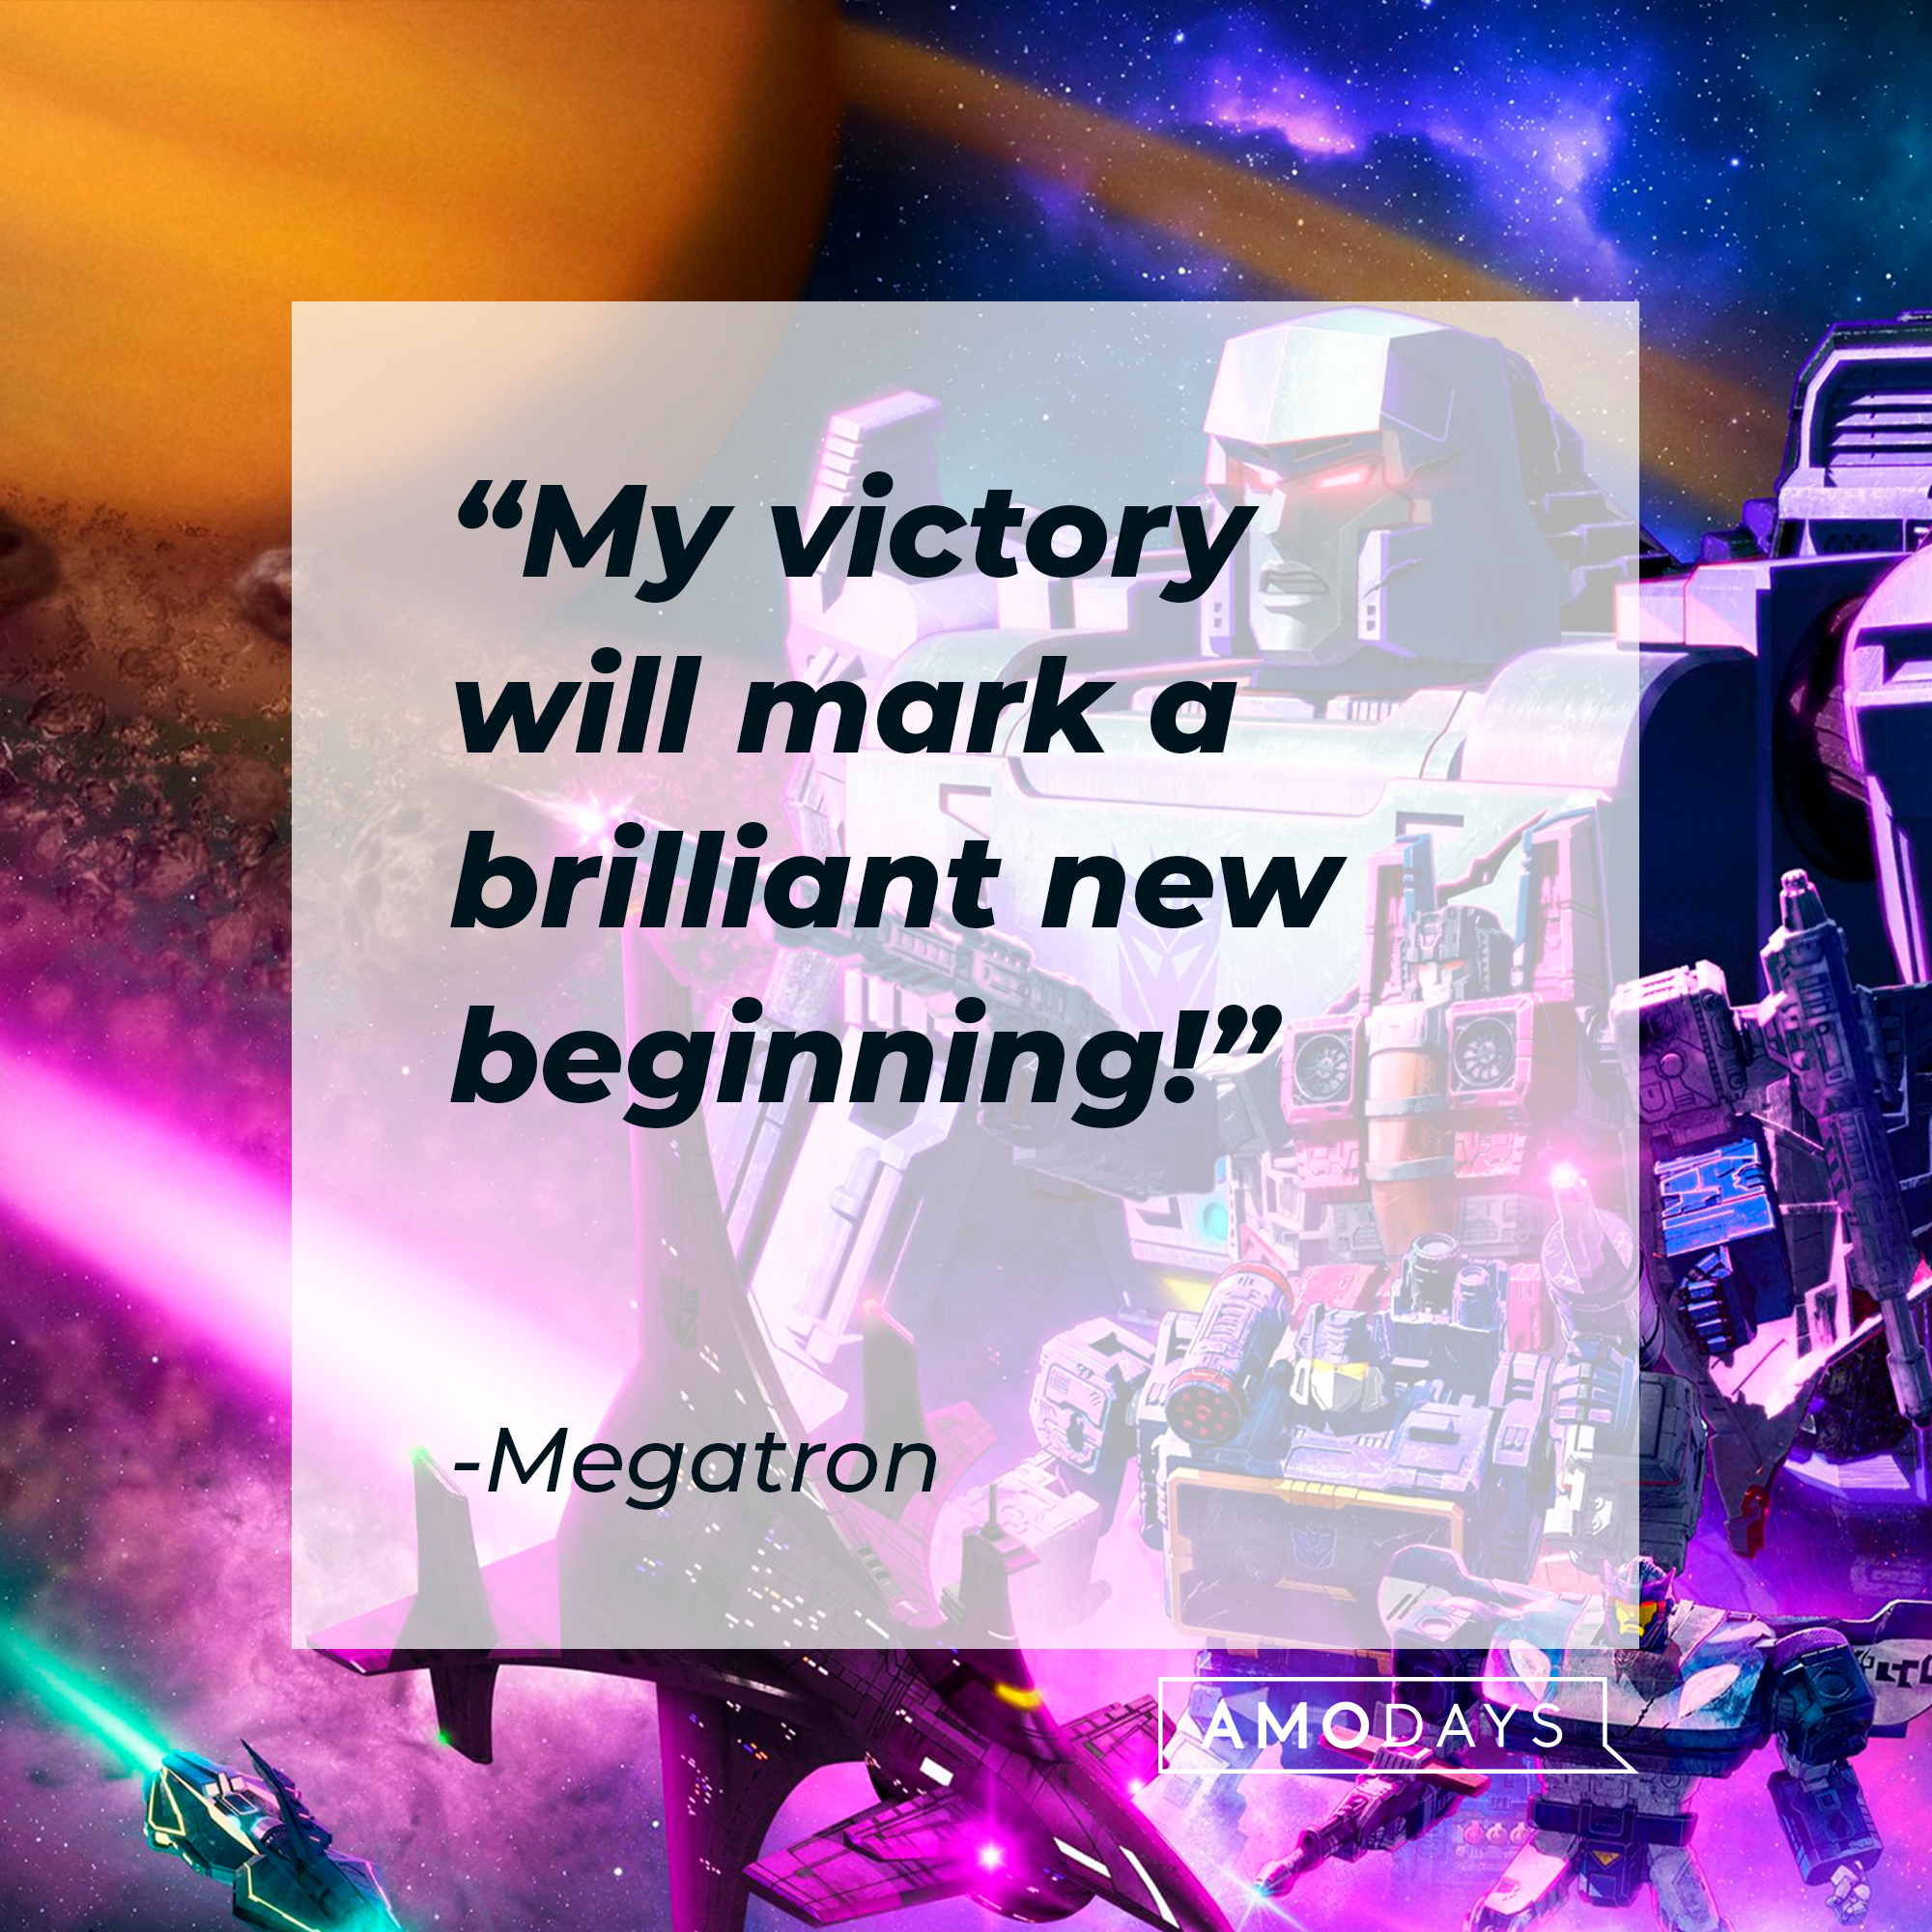 A photo of Megatron with his quote, "My victory will mark a brilliant new beginning!" | Source: Facebook/transformers